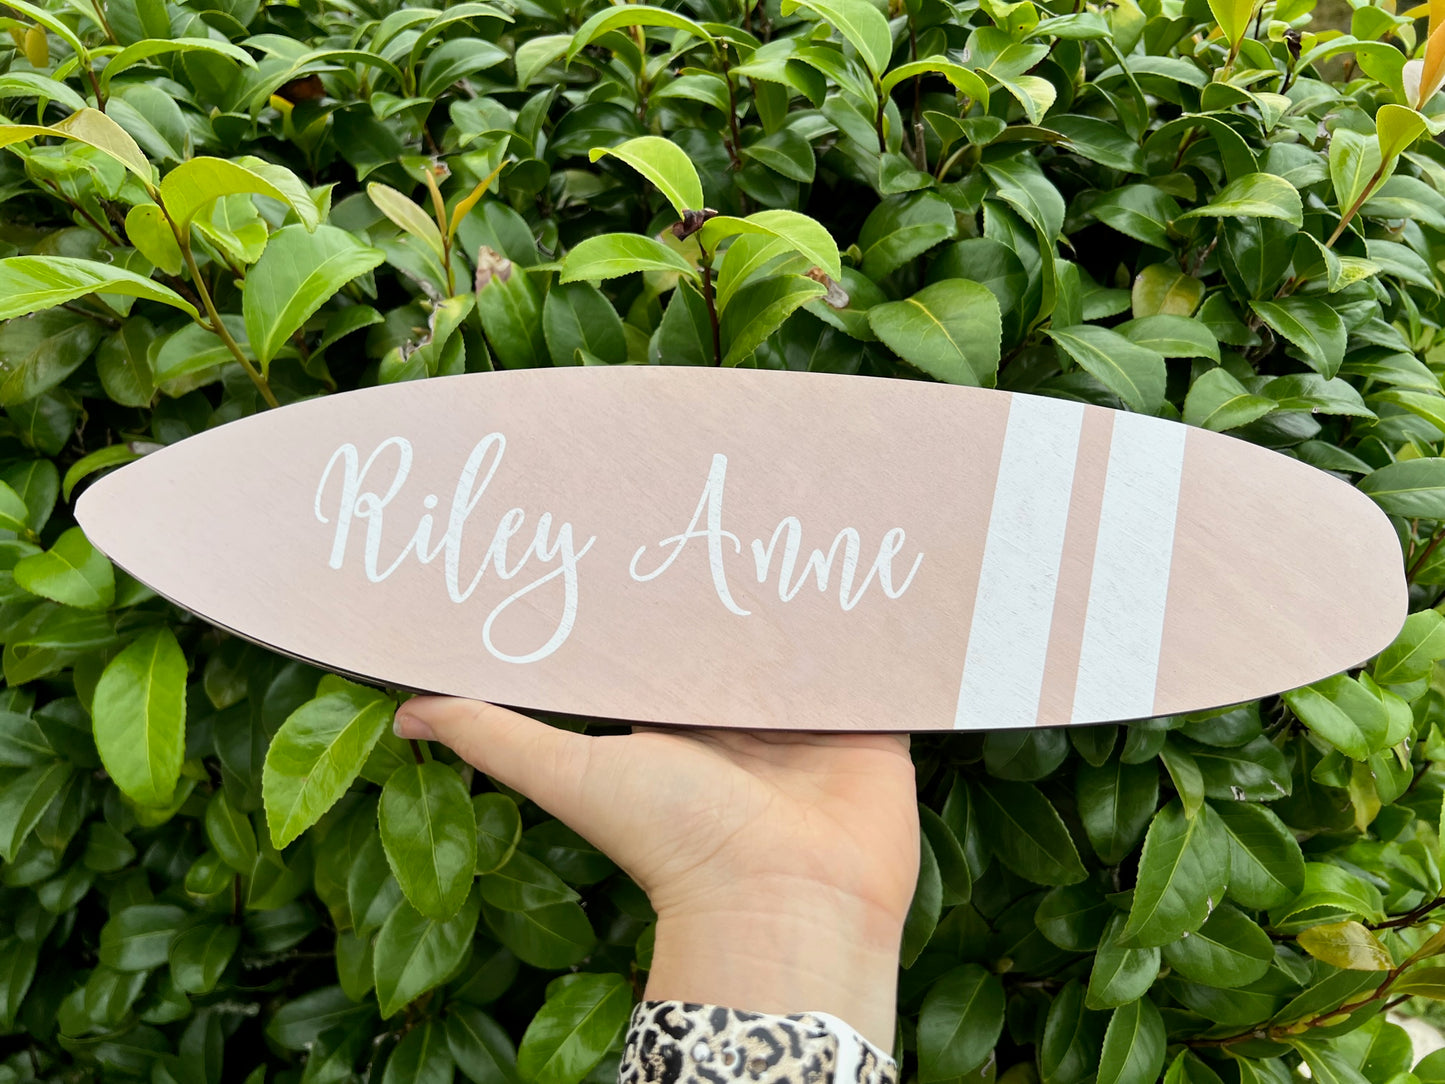 Surfboard name sign - two stripes